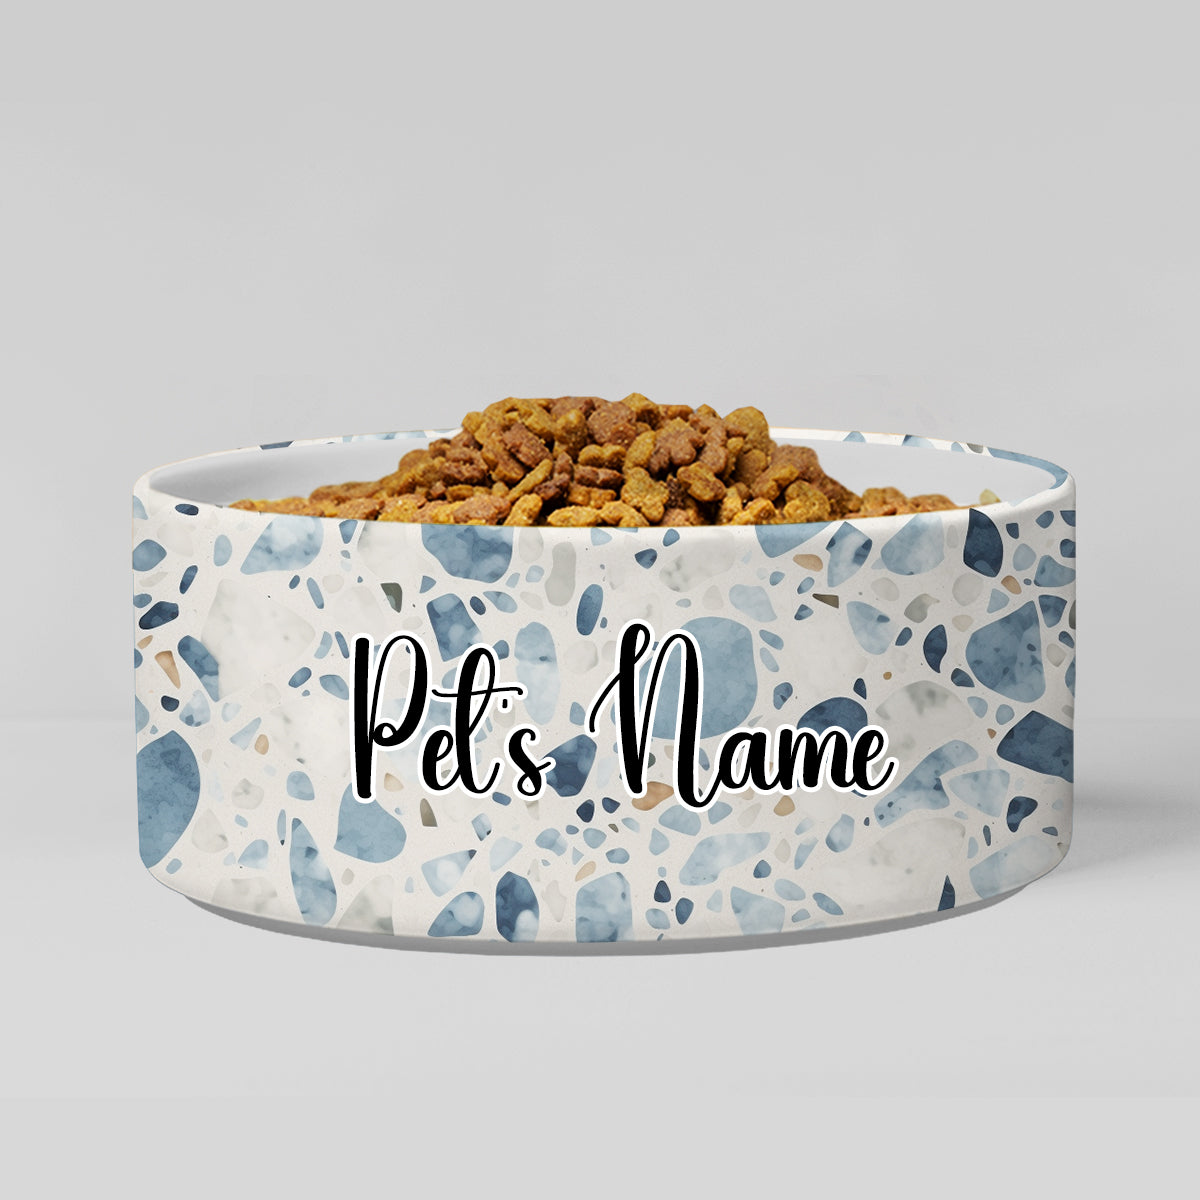 Personalized Dog Pet Cat Bowls, Boho Chic Terrazzo 02 Personalized Pet Bowls for Dogs and Cats, Eclectic Modern Spotted Dishes With Name, Ceramic Custom Cute Dog Bowls, Designer Large and Small Dog Cat Pet Bowls Dish, Gift for Pet